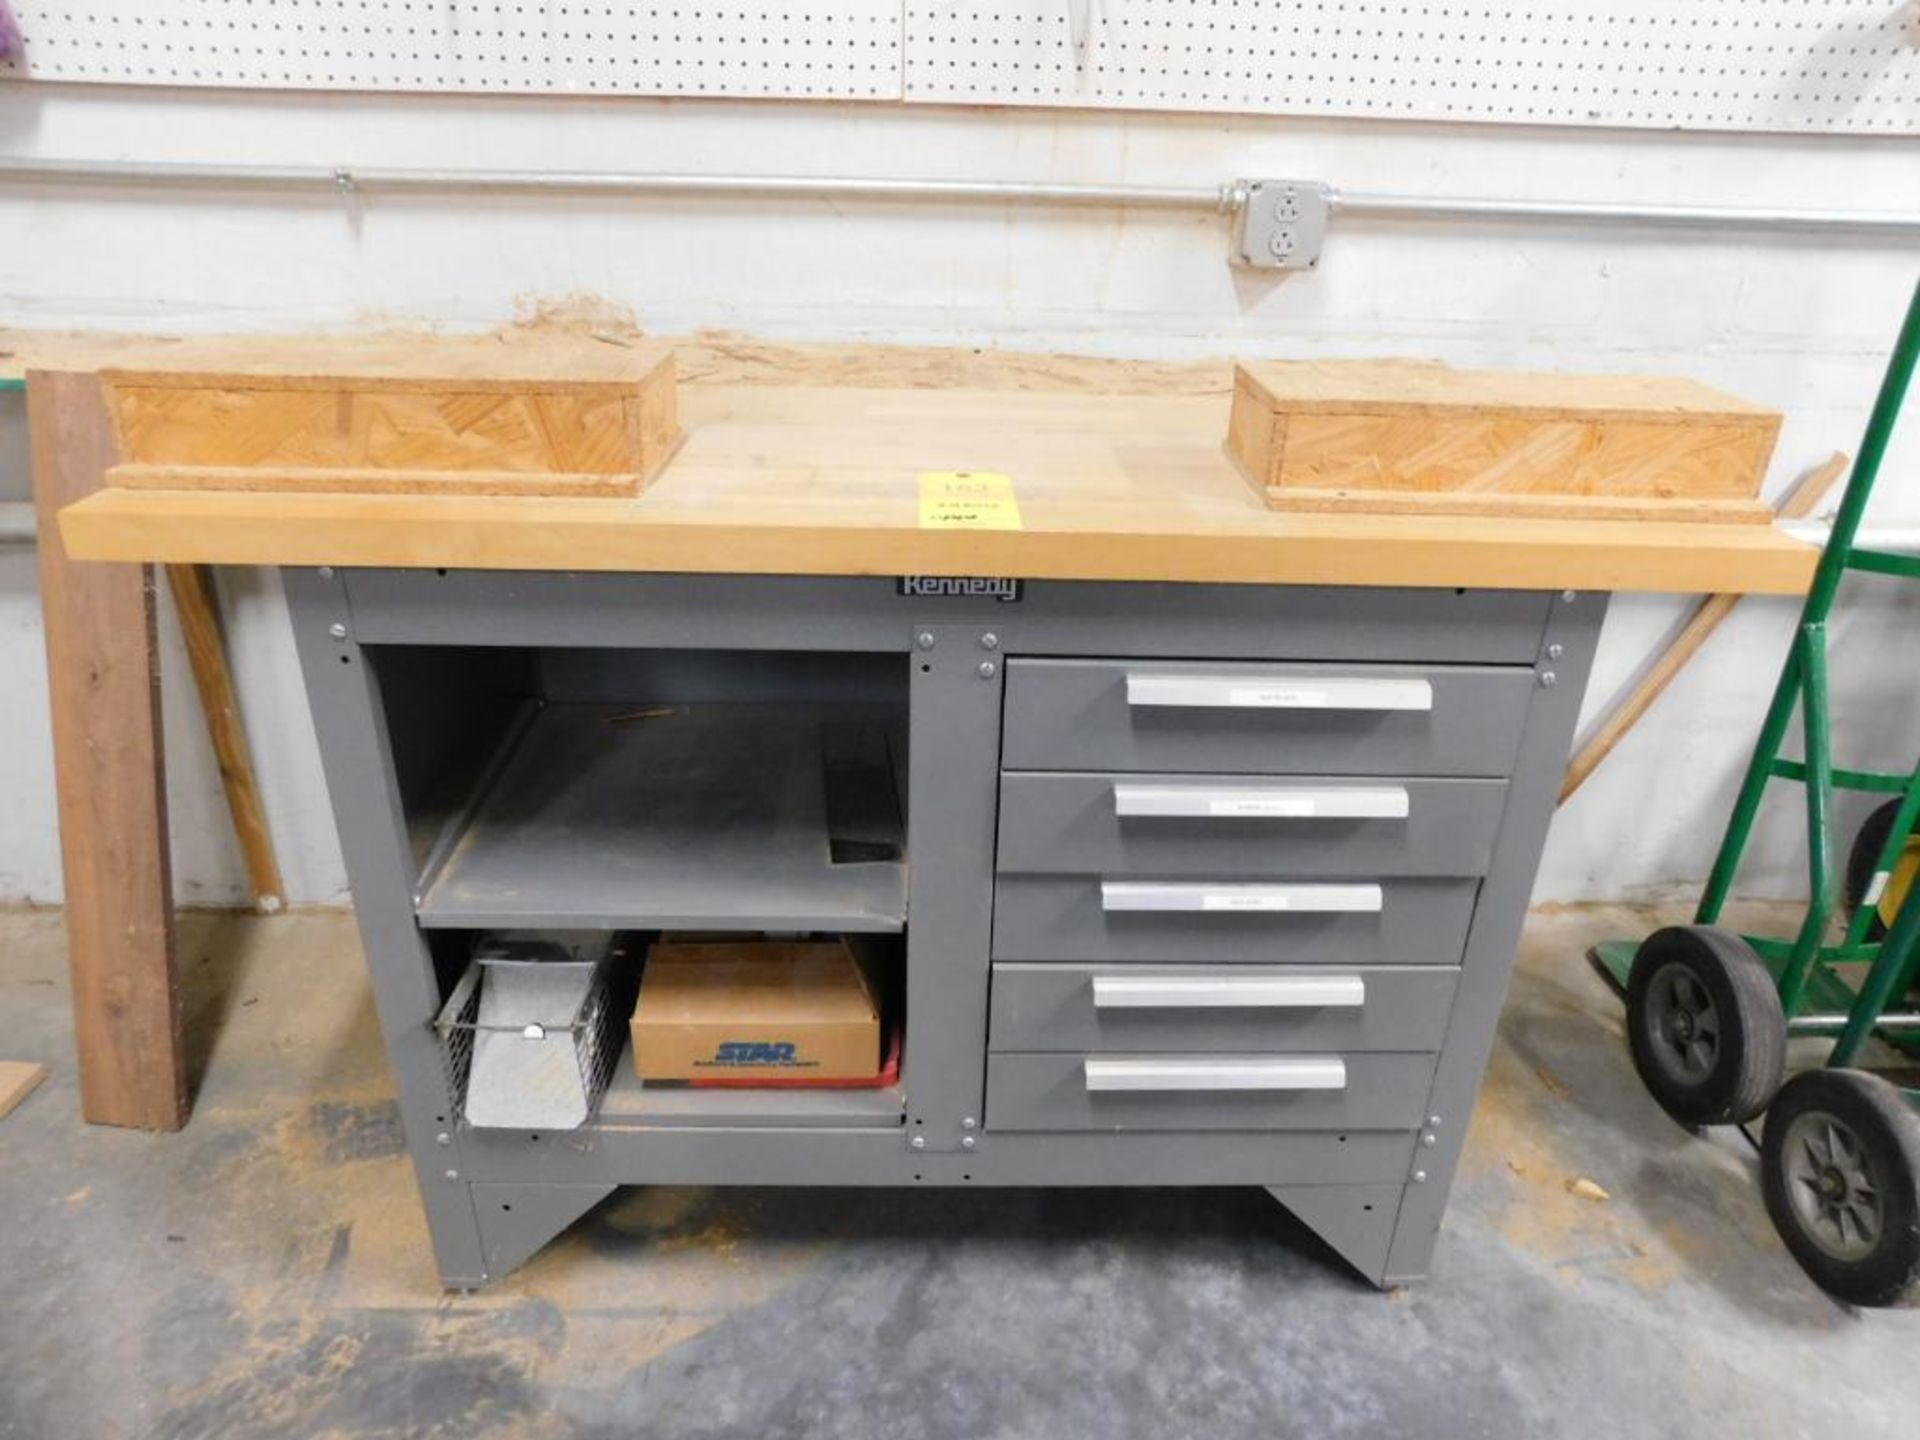 LOT: Kennedy 54" x 20" Maple Top 5-Drawer Work Bench w/Contents of Wood Work Supplies (LOCATION: IN